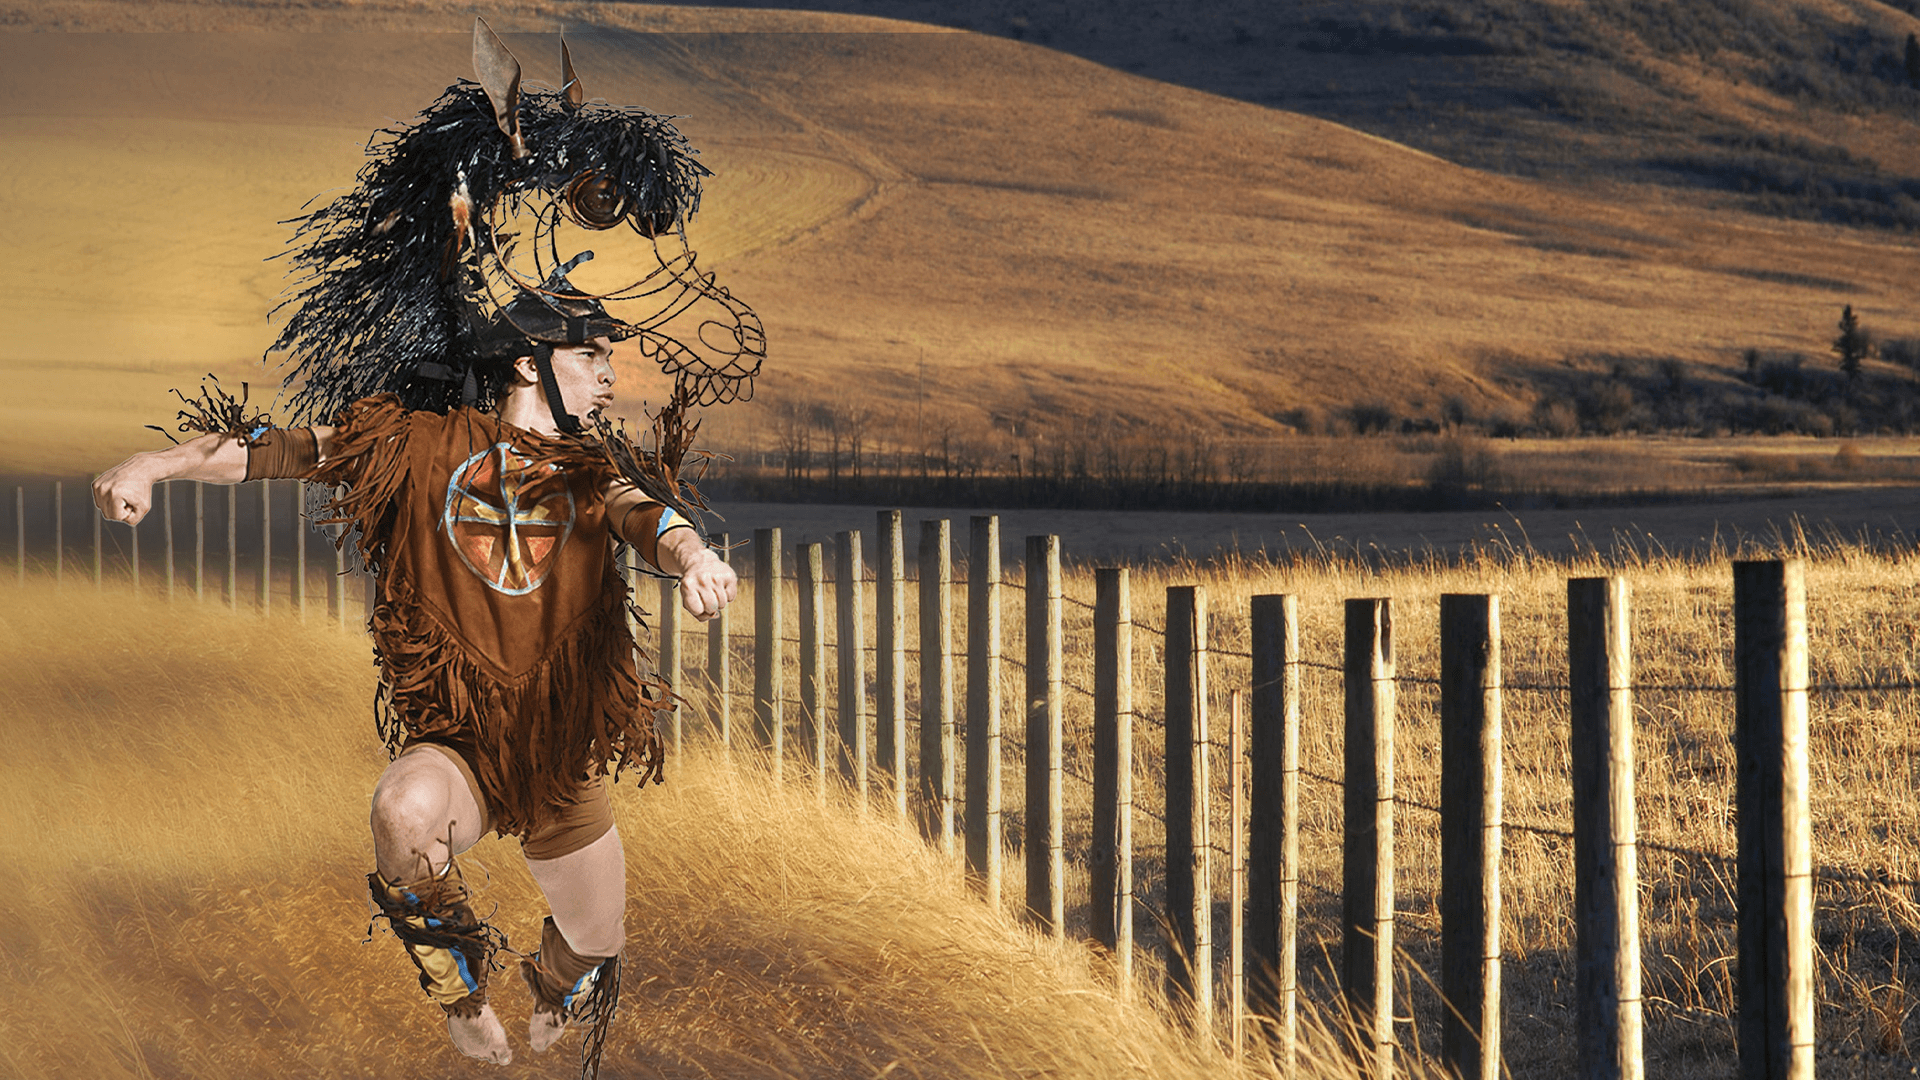 An indigenous person in a horse costume by a fence. 